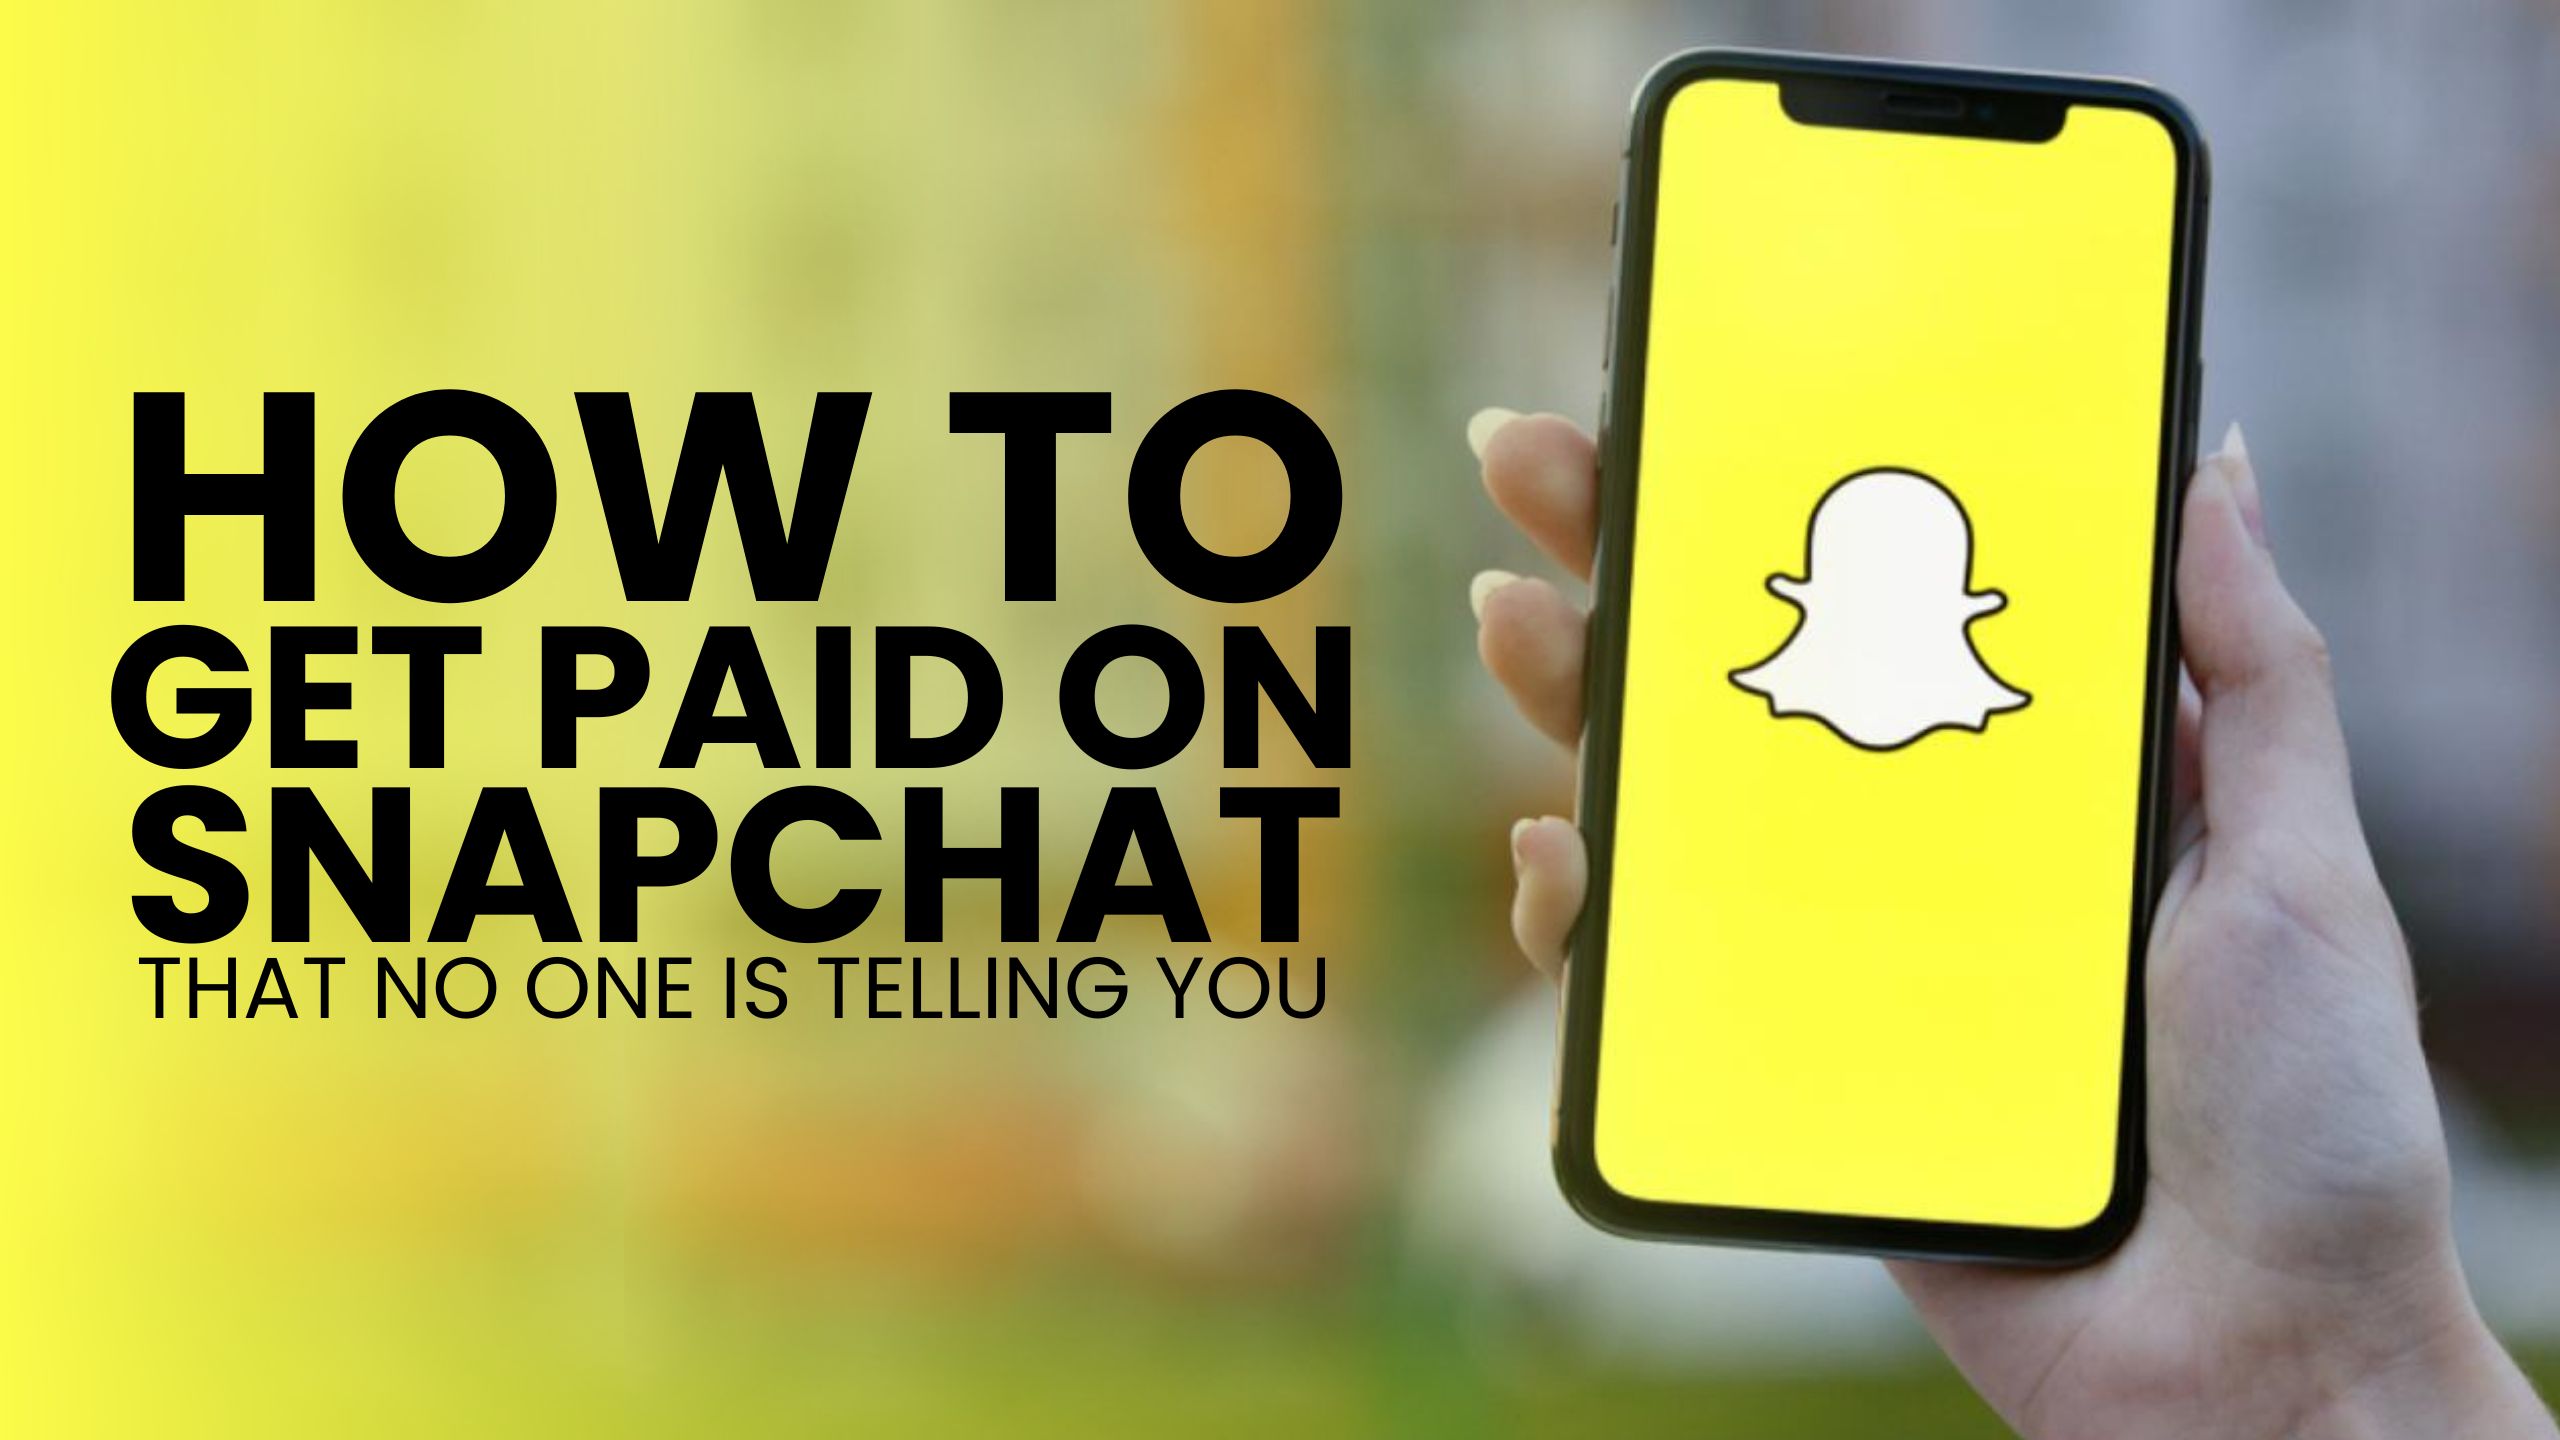 How To Get Paid on Snapchat